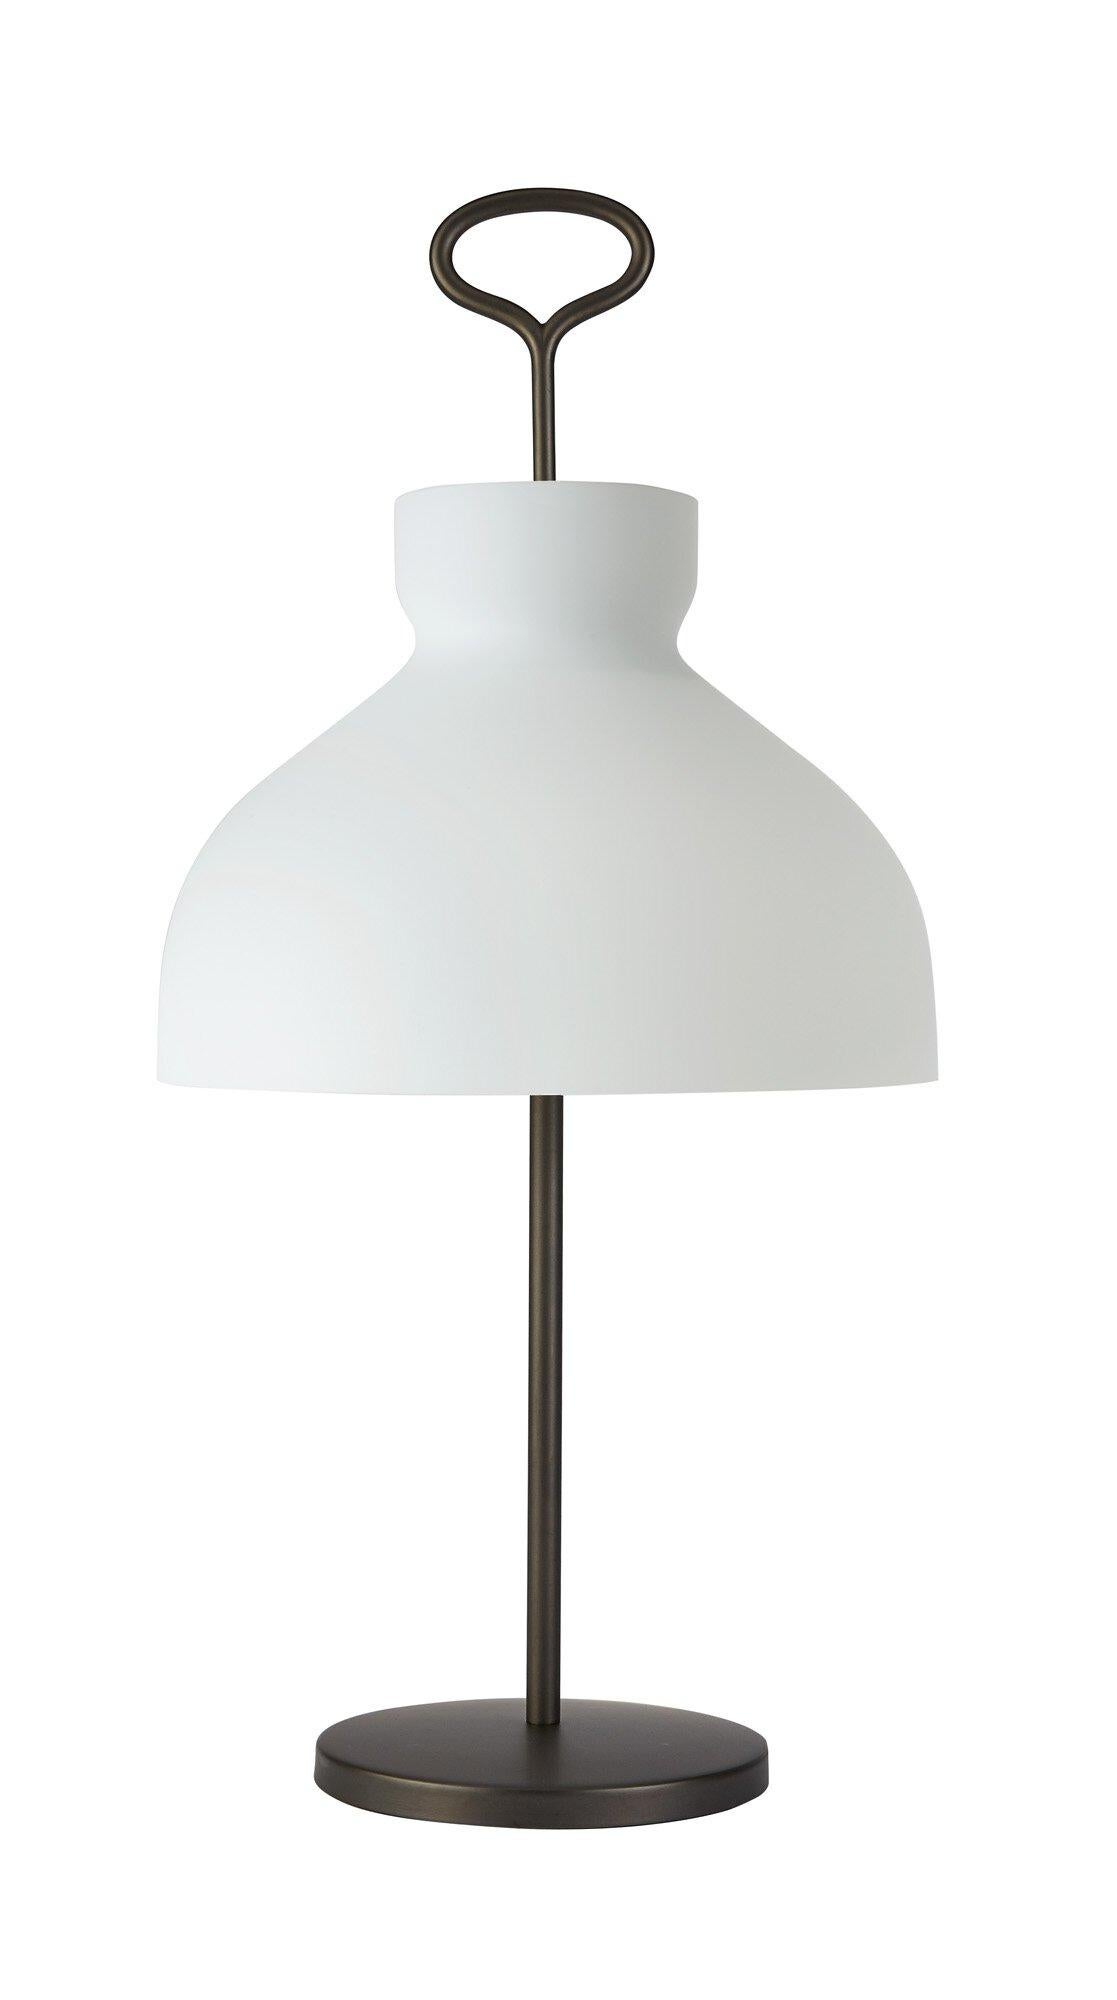 In 1956 the maestro Ignazio Gardella created the Arenzano lamp. He named it after the Ligurian seaside resort where he designed and built numerous buildings for the Milanese establishment of those years. He made it with a slim body but with a solid